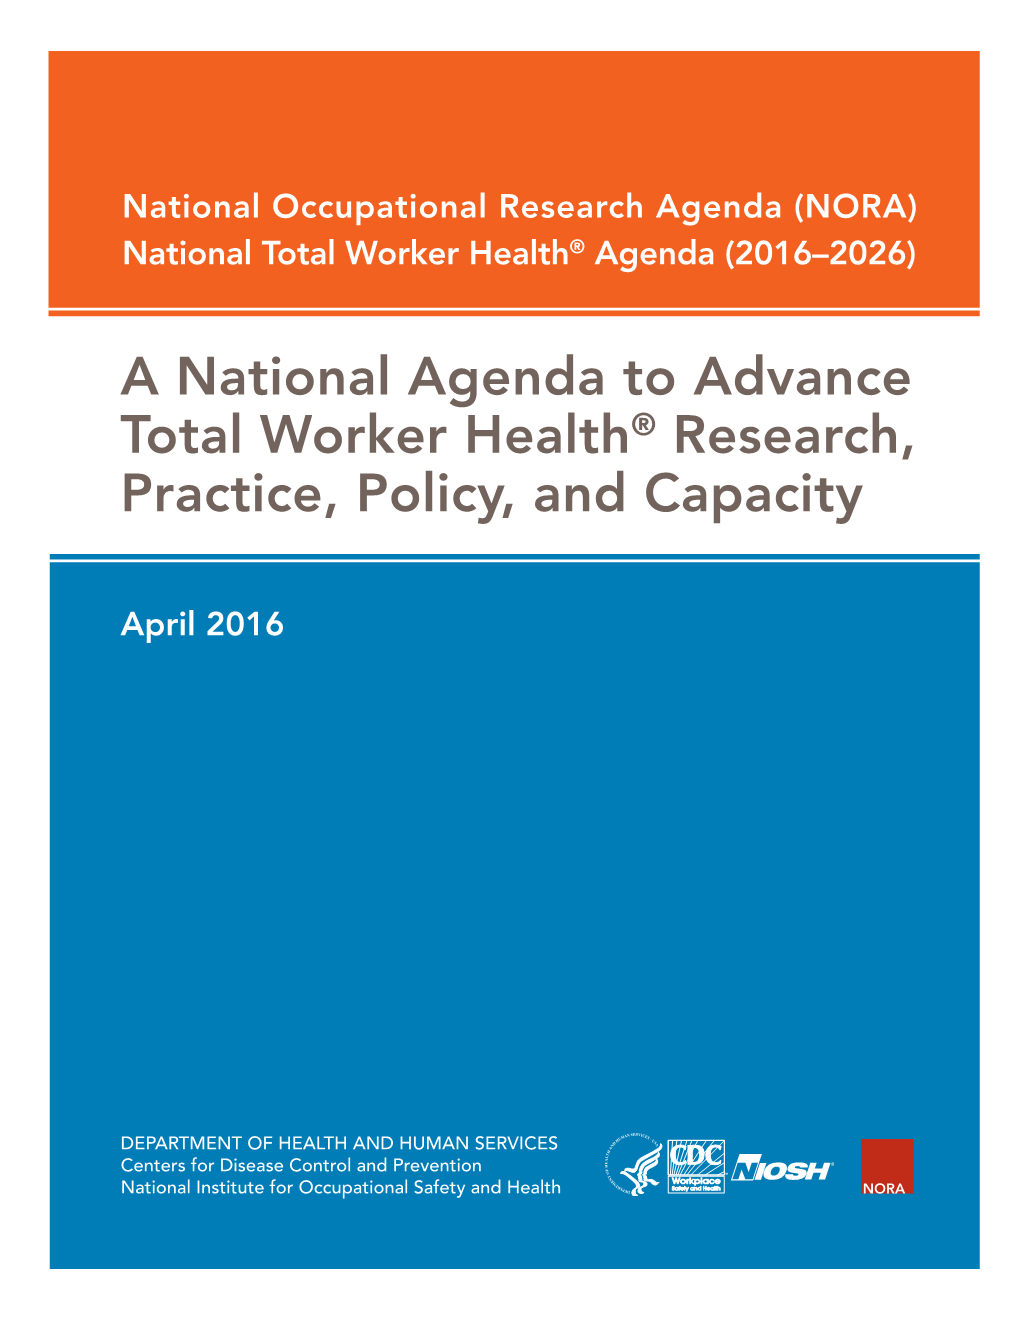 A National Agenda to Advance Total Worker Health Research, Practice, Policy, and Capacity